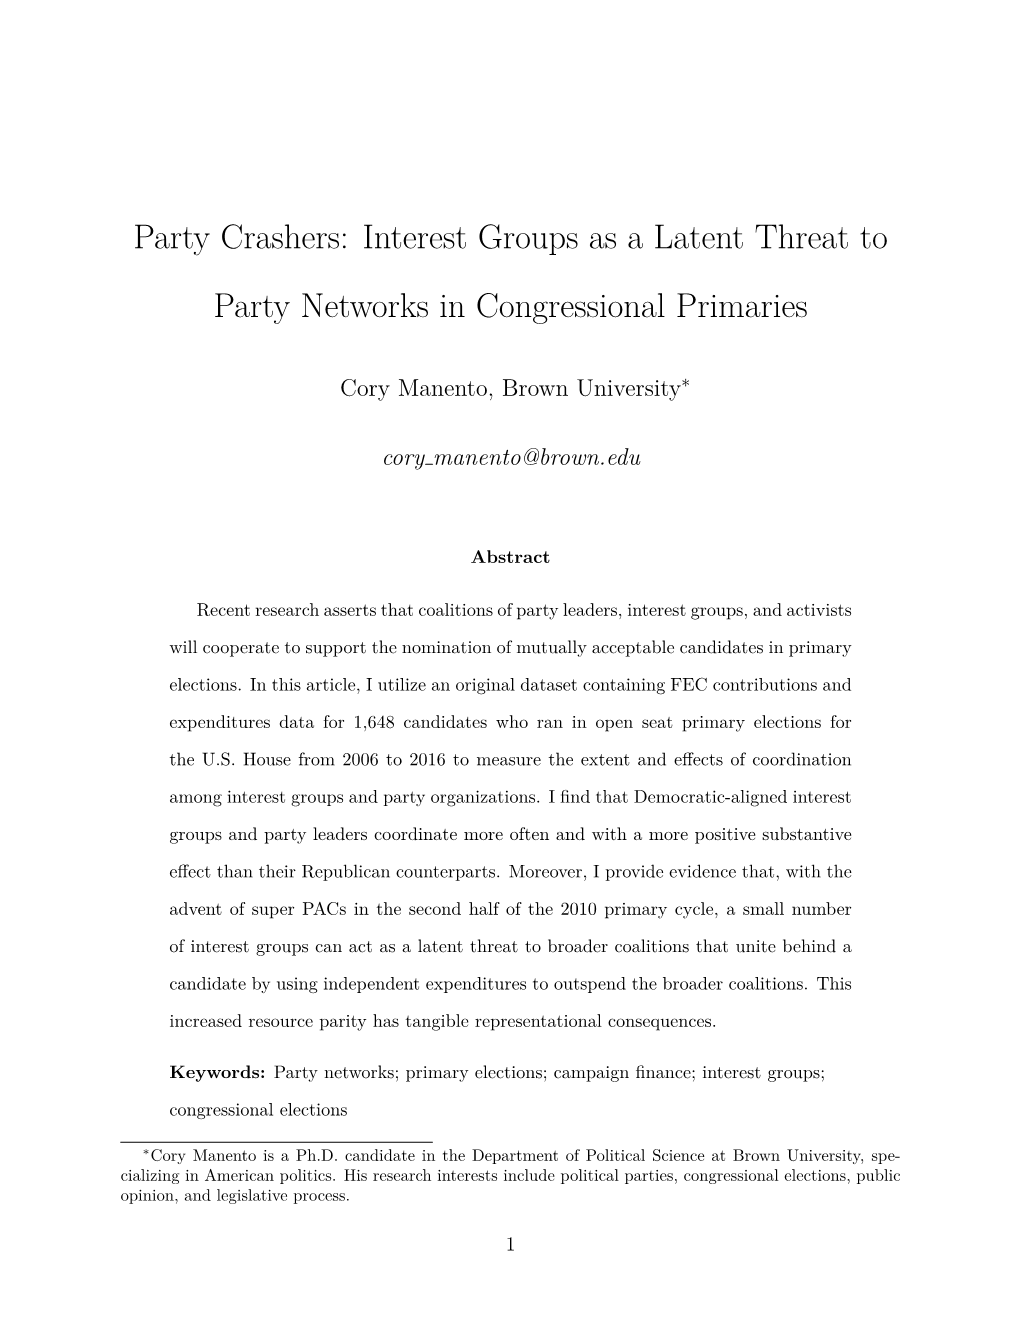 Interest Groups As a Latent Threat to Party Networks in Congressional Primaries